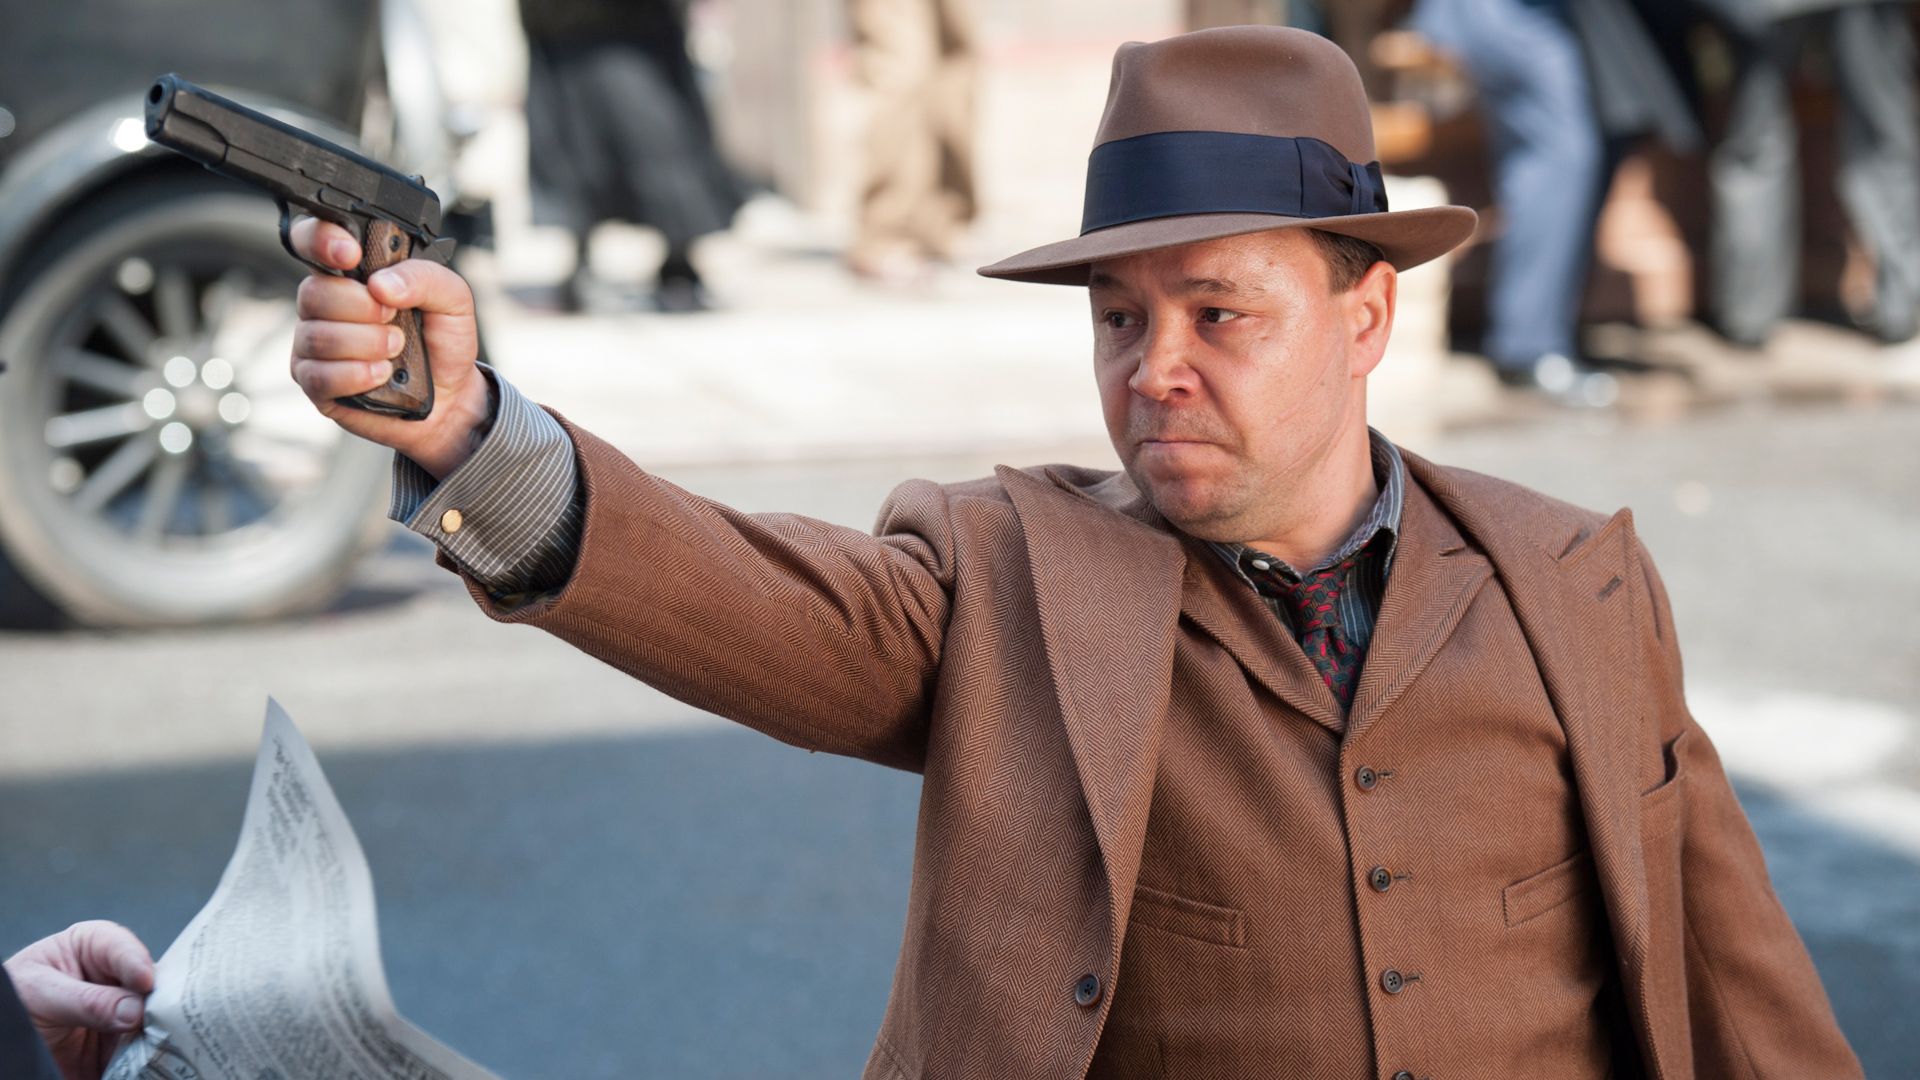 Peaky Blinders star doubts Stephen Graham will play Al Capone: "I don't think it'd work"